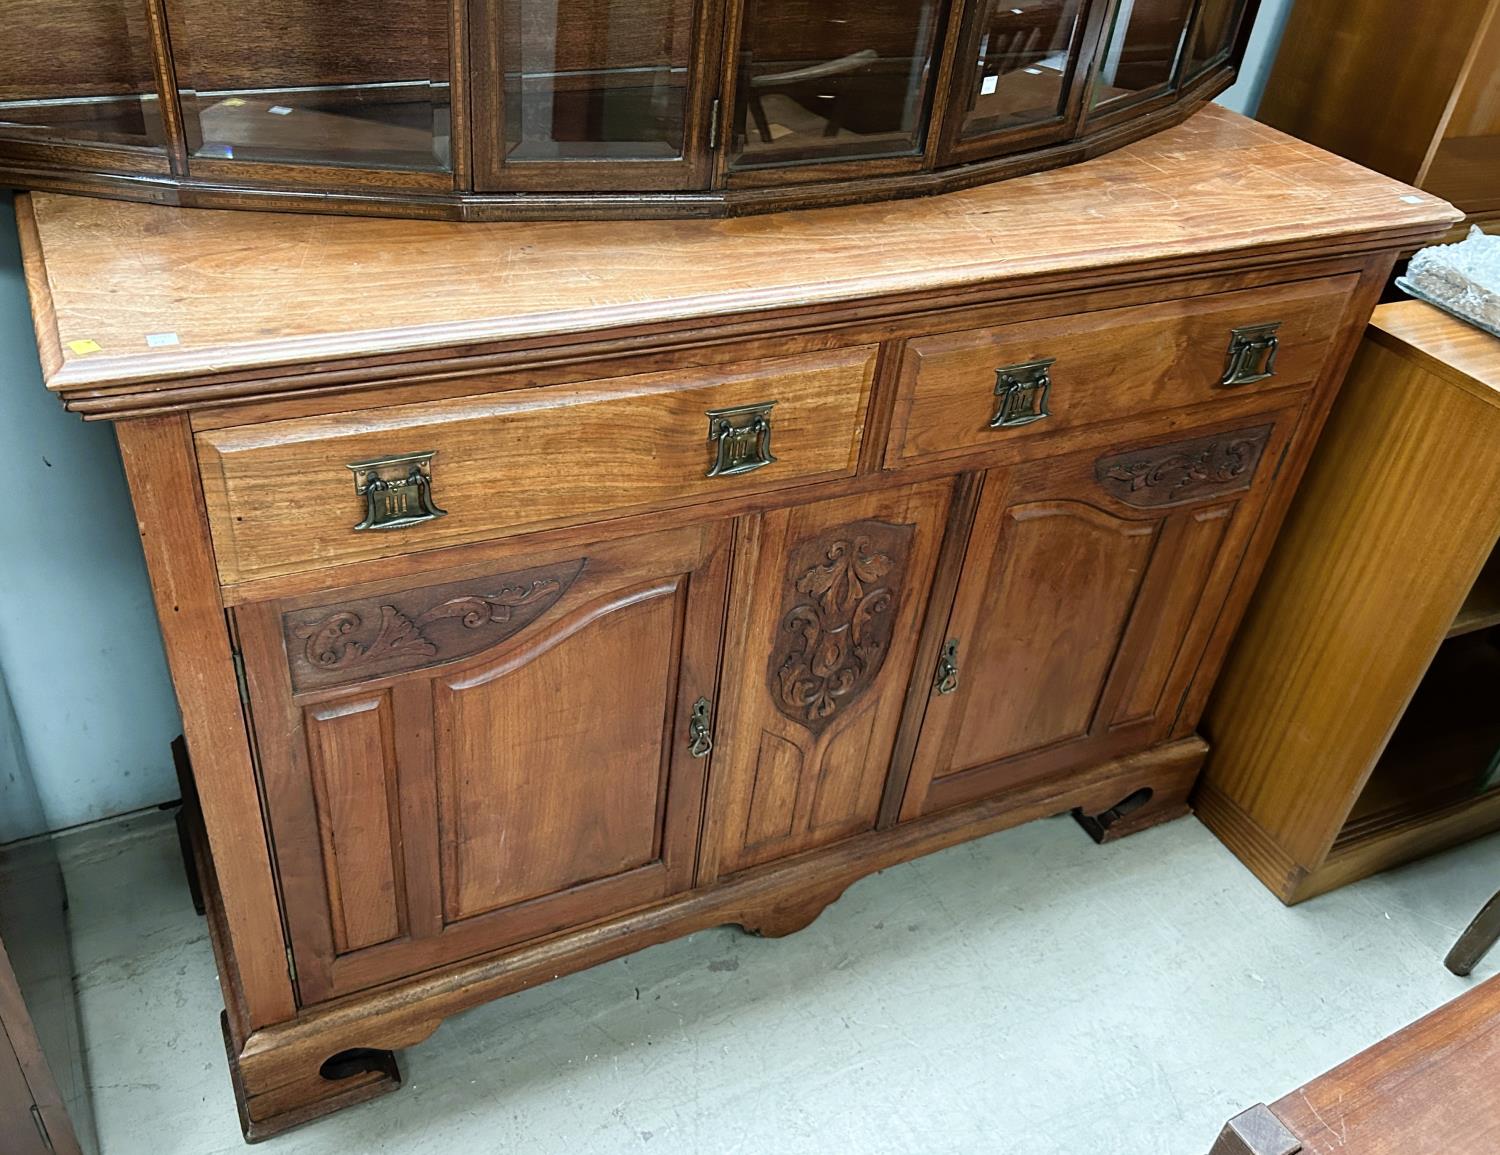 An Edwardian carved walnut sideboard base of two drawers and two cupboards on plinth.